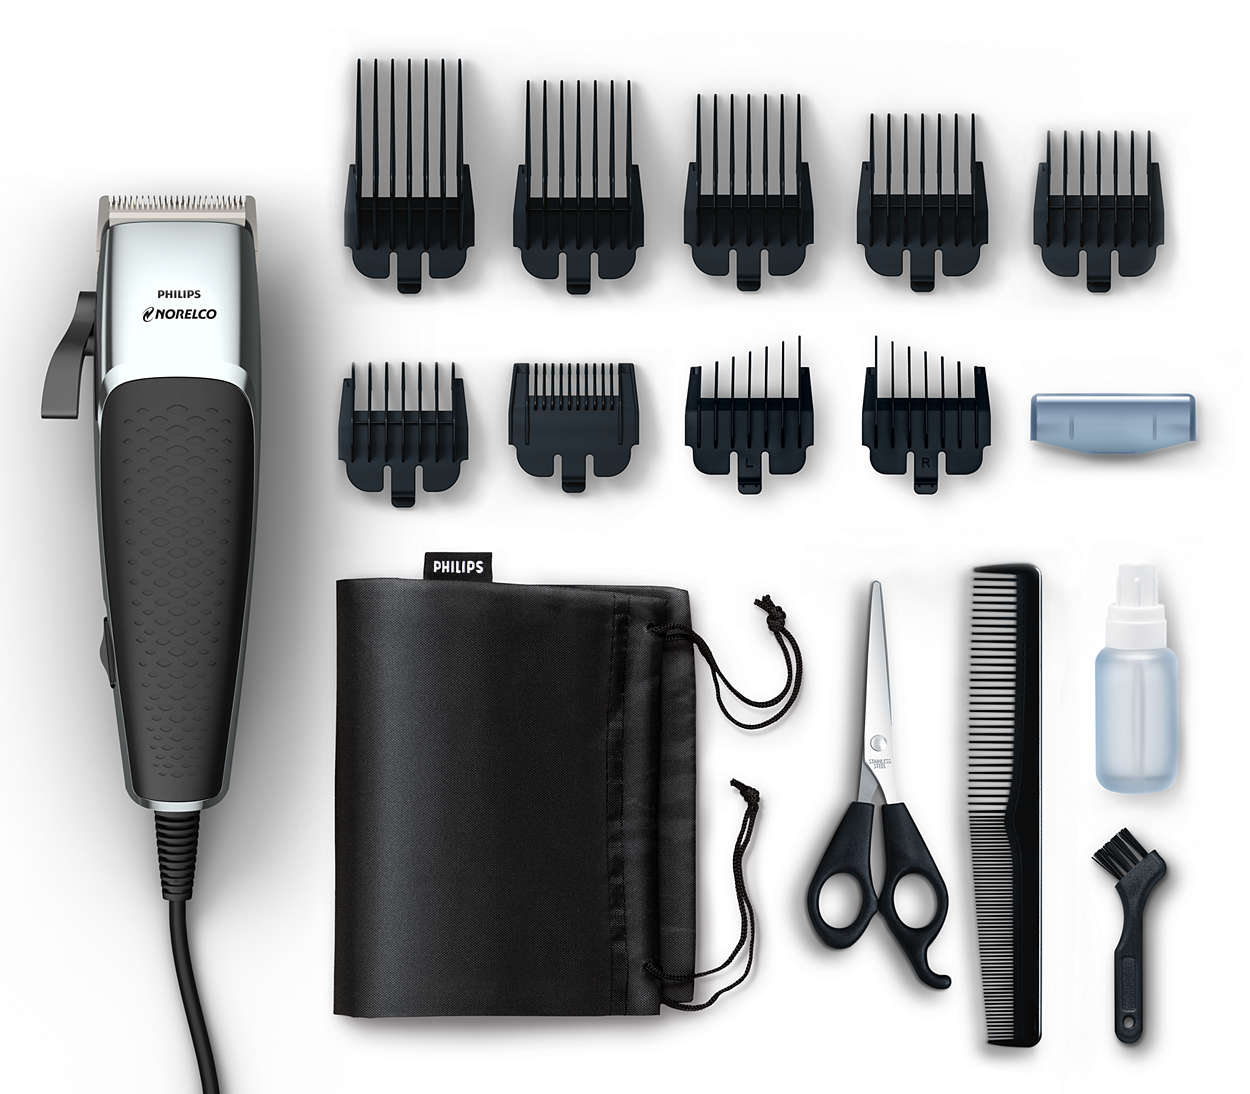 Hairclipper series 5000 Hair and beard trimmer HC5100/40 | Philips